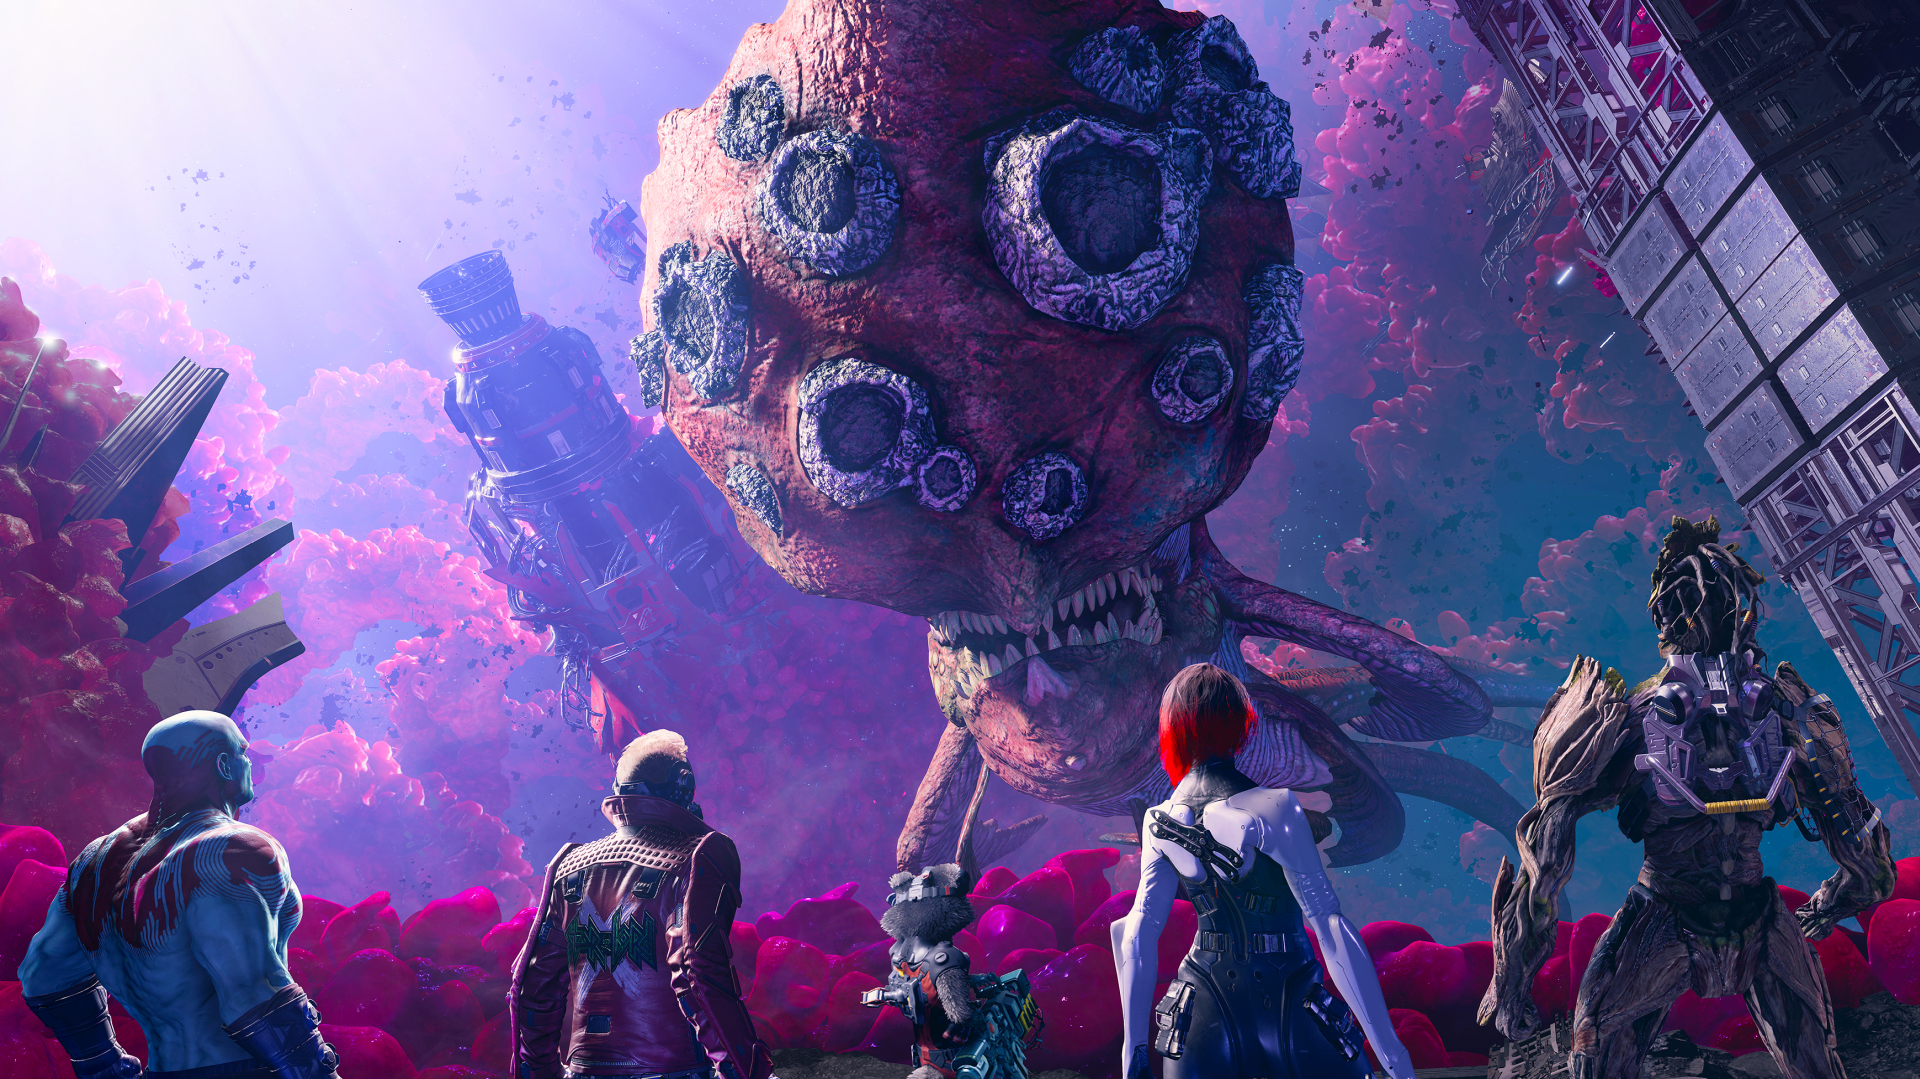 The Guardians staring at a giant alien monster